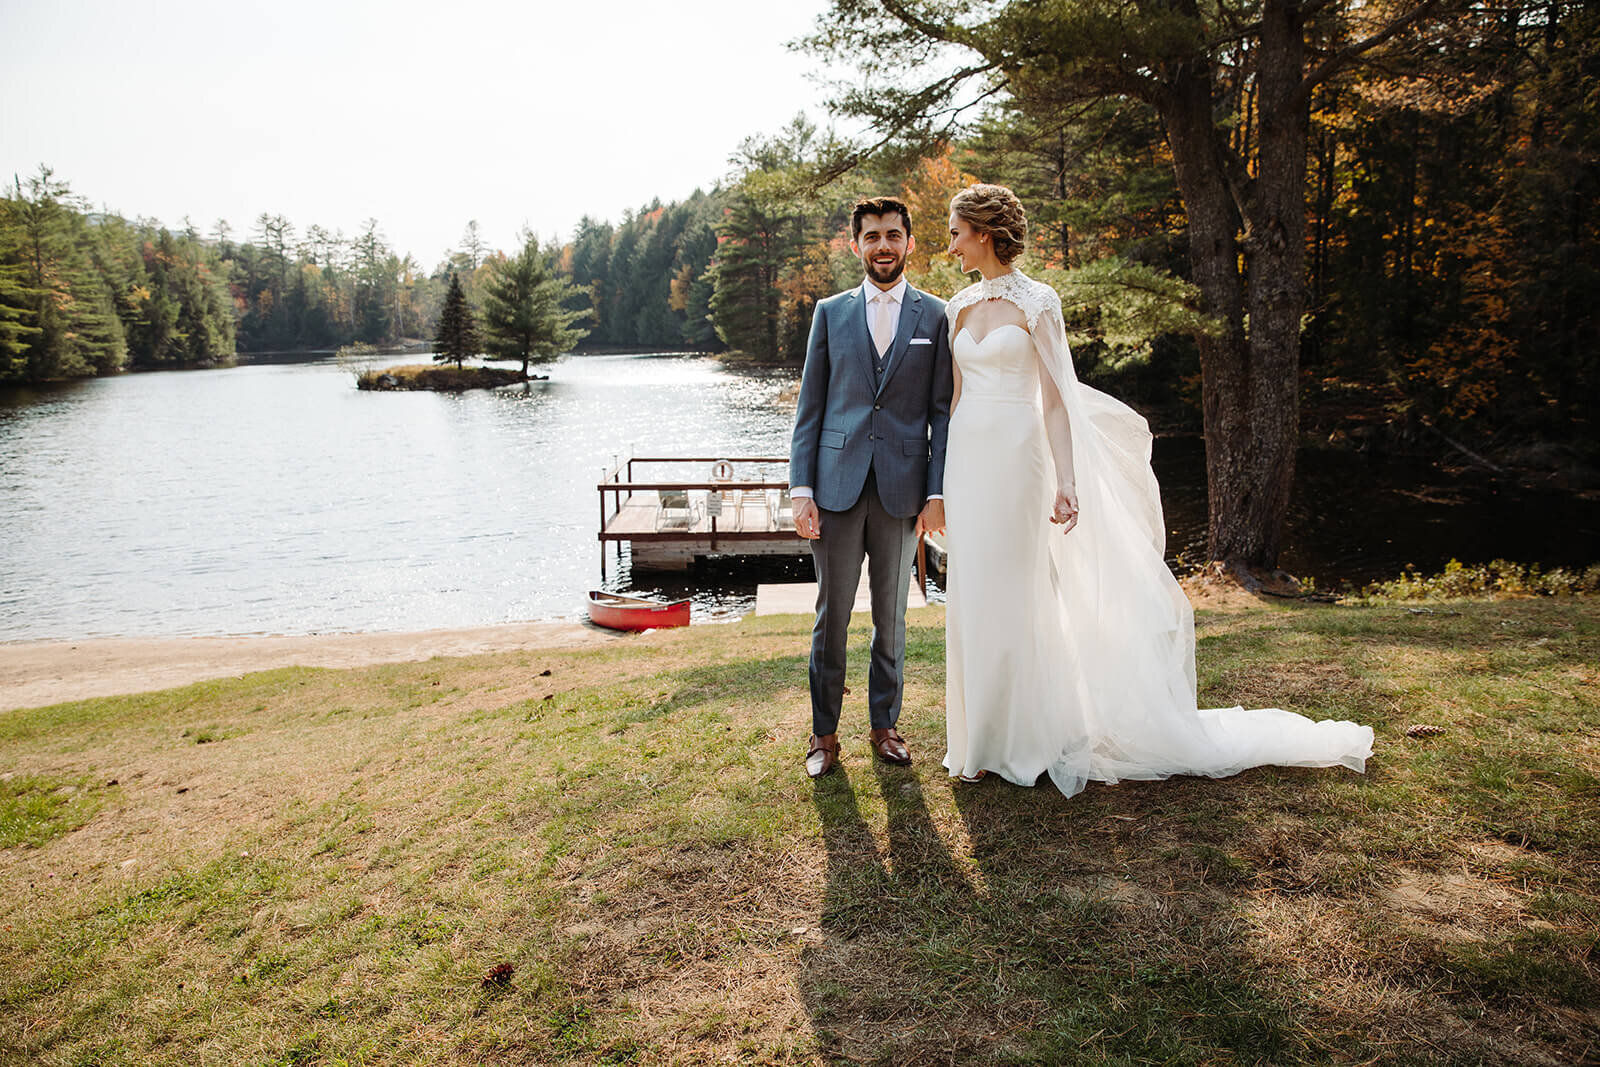  First look between the couple at their lake lodge during their small outdoor wedding in the Adirondacks in Upstate NY.  Upstate NY small wedding venues. Upstate New York wedding packages. 